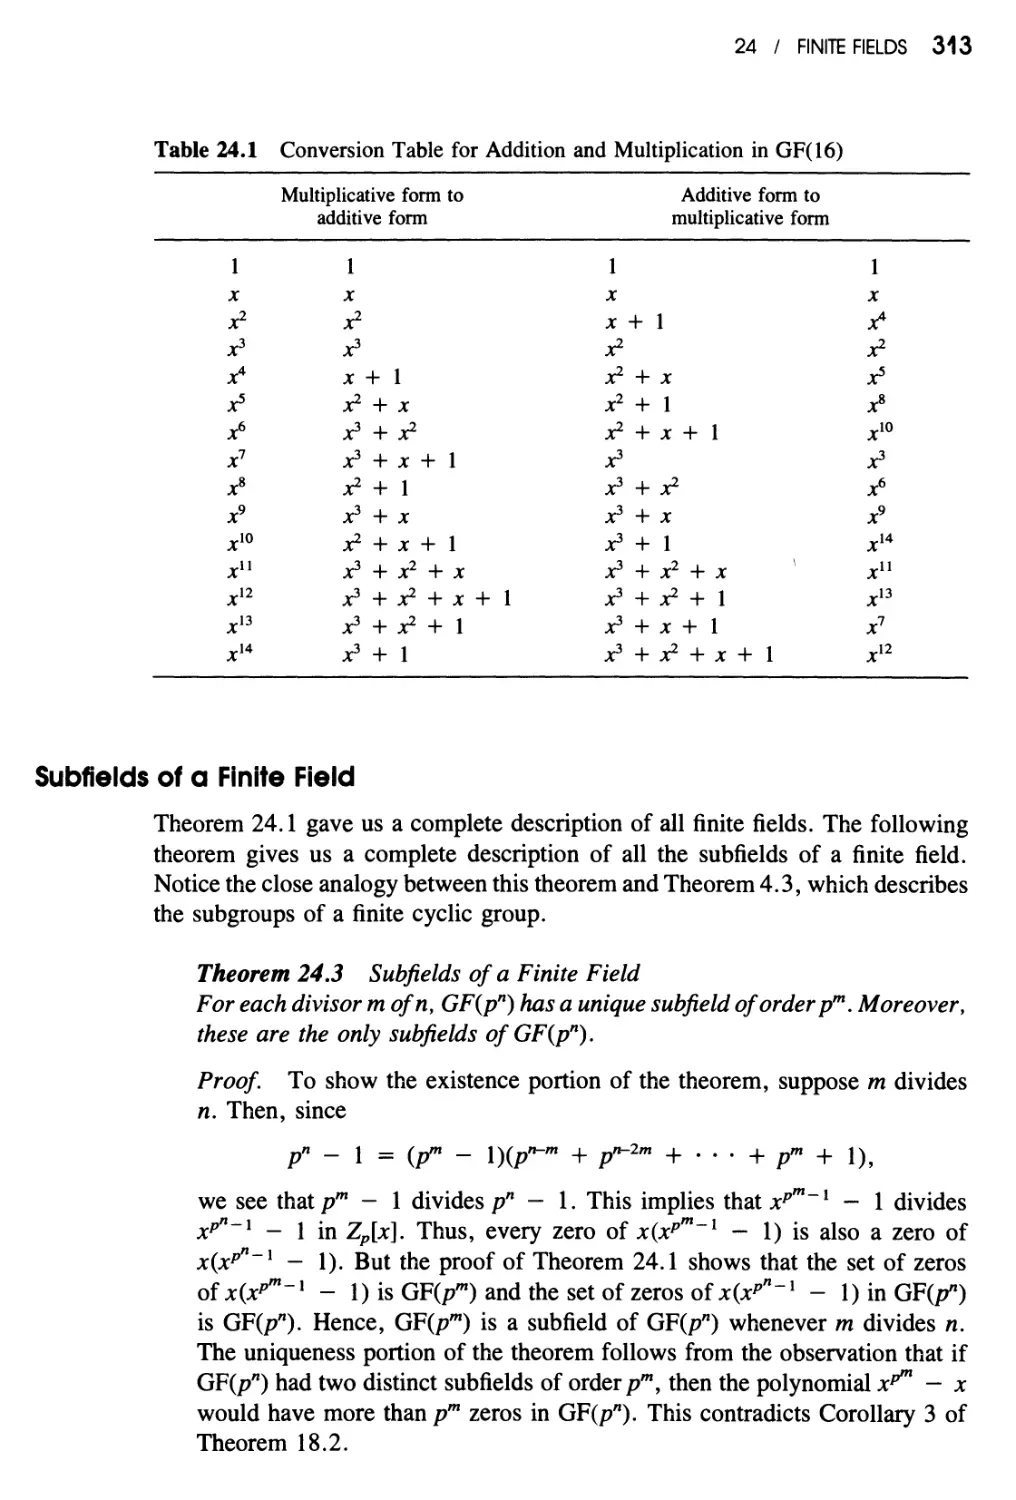 Subfields of a Finite Field